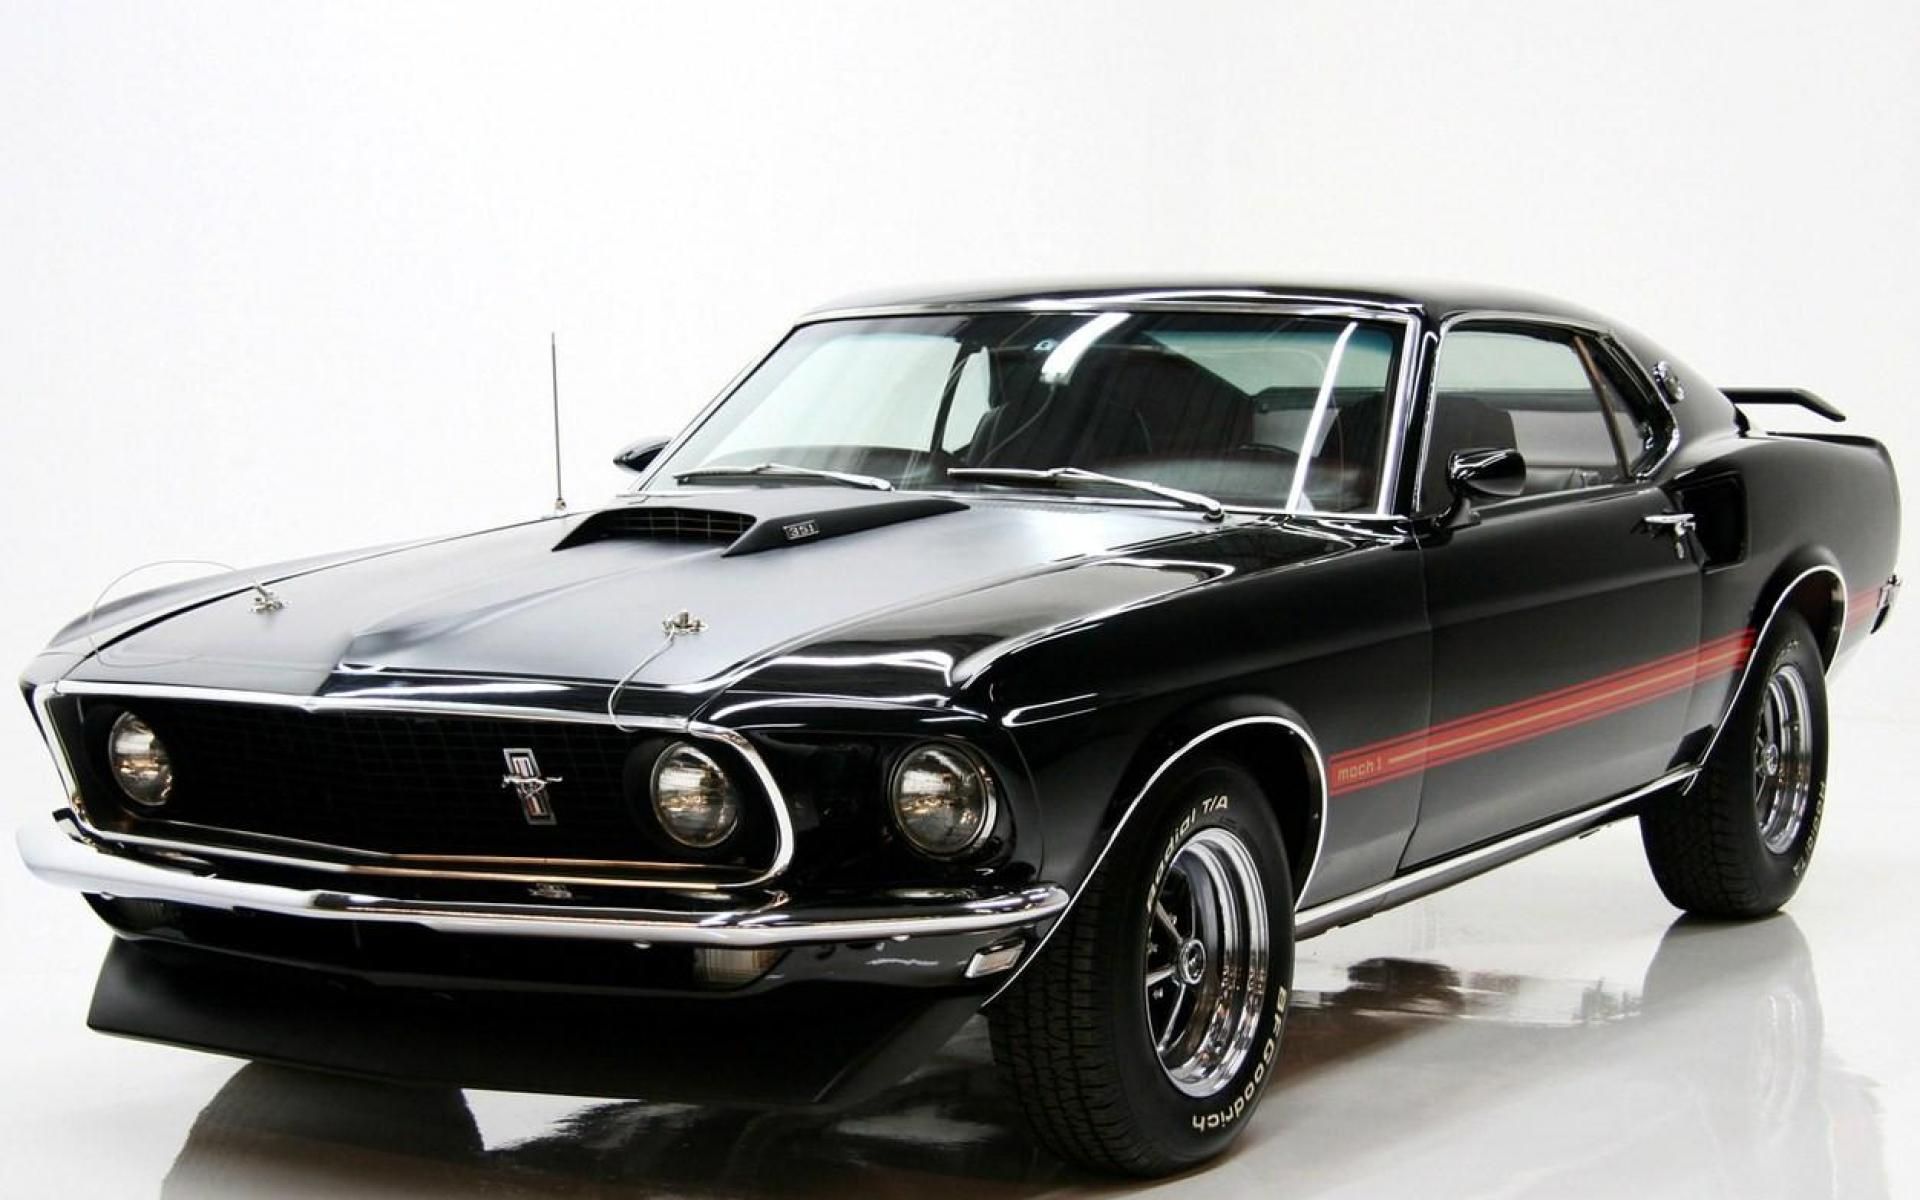 1969 ford mustang - (#81856) - High Quality and Resolution ...